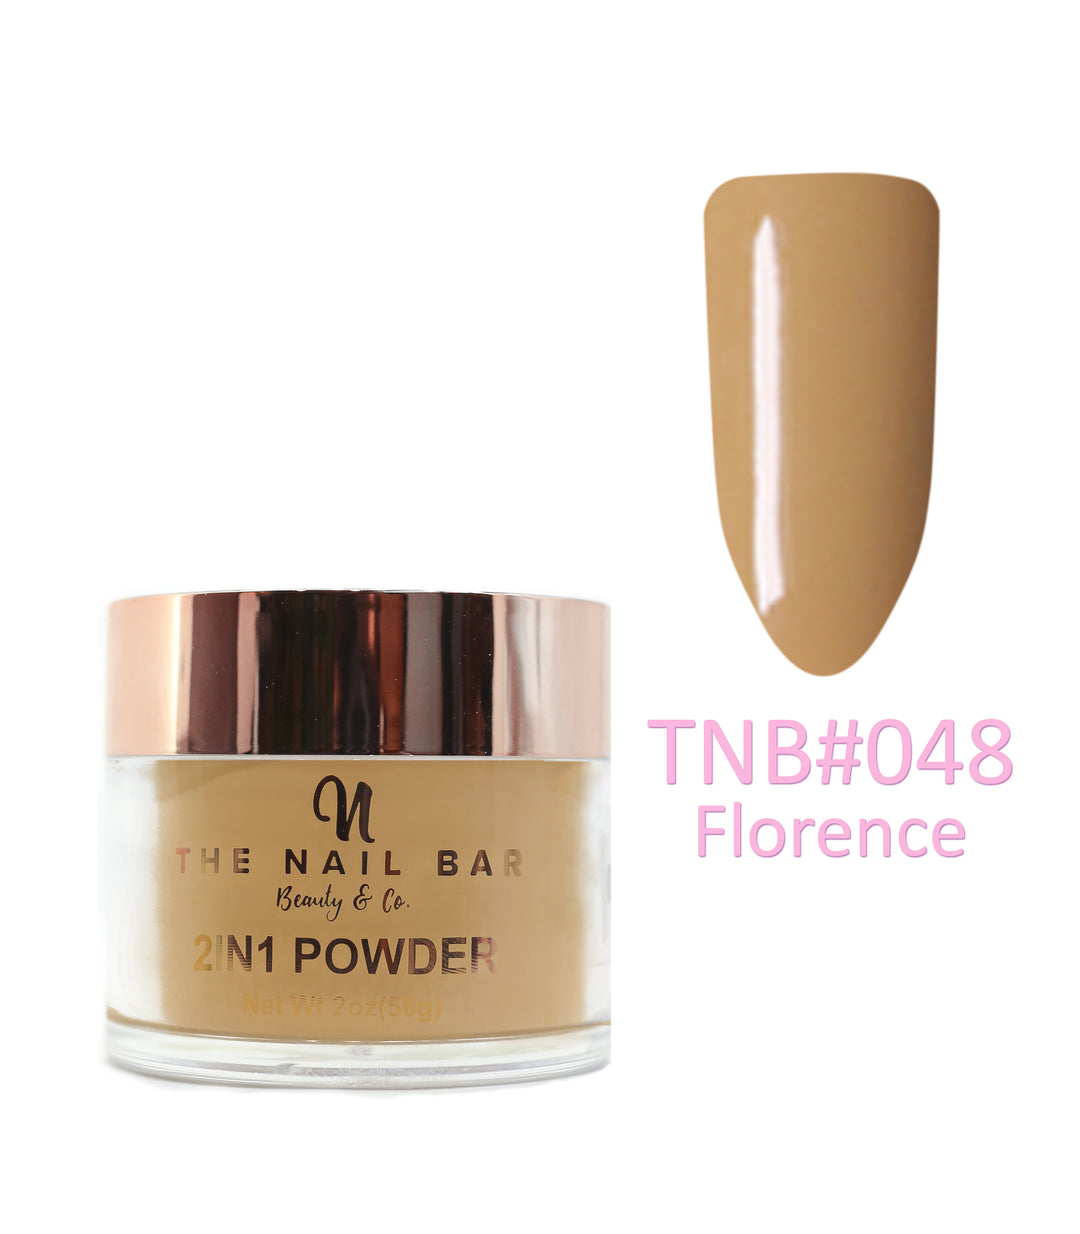 2-In-1 Dipping/Acrylic colour powder (2oz) -Florence - The Nail Bar Beauty & Co.